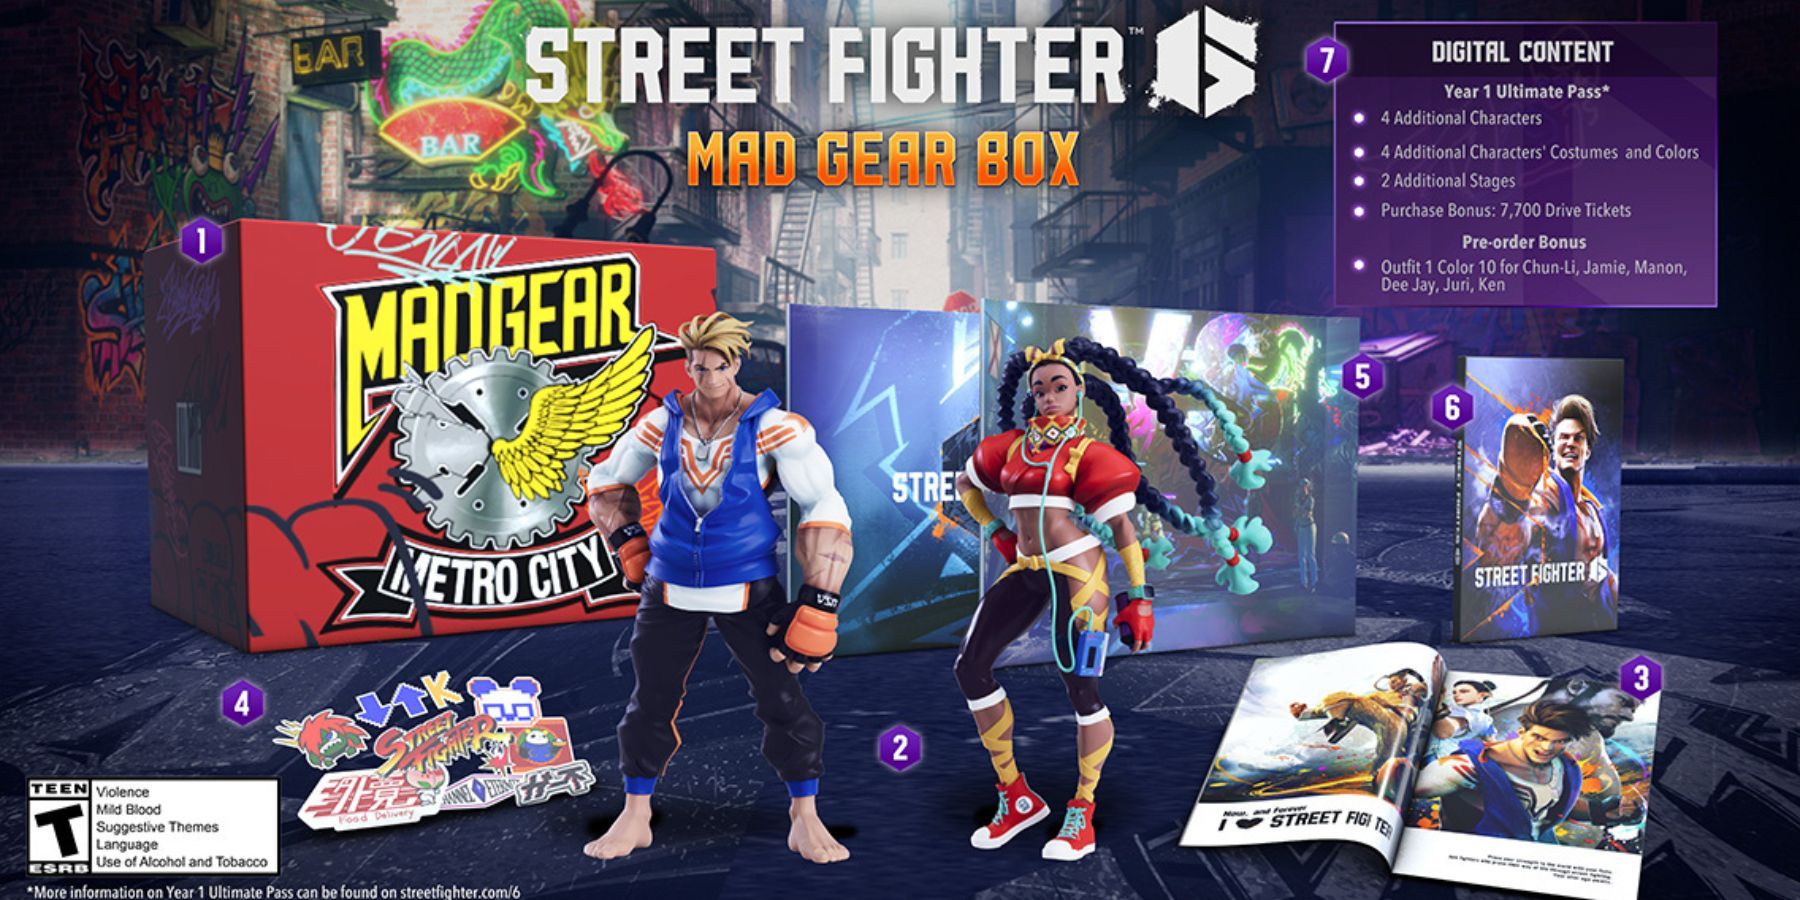 The image shows the benefits of Street Fighter 6 Collector's Edition.